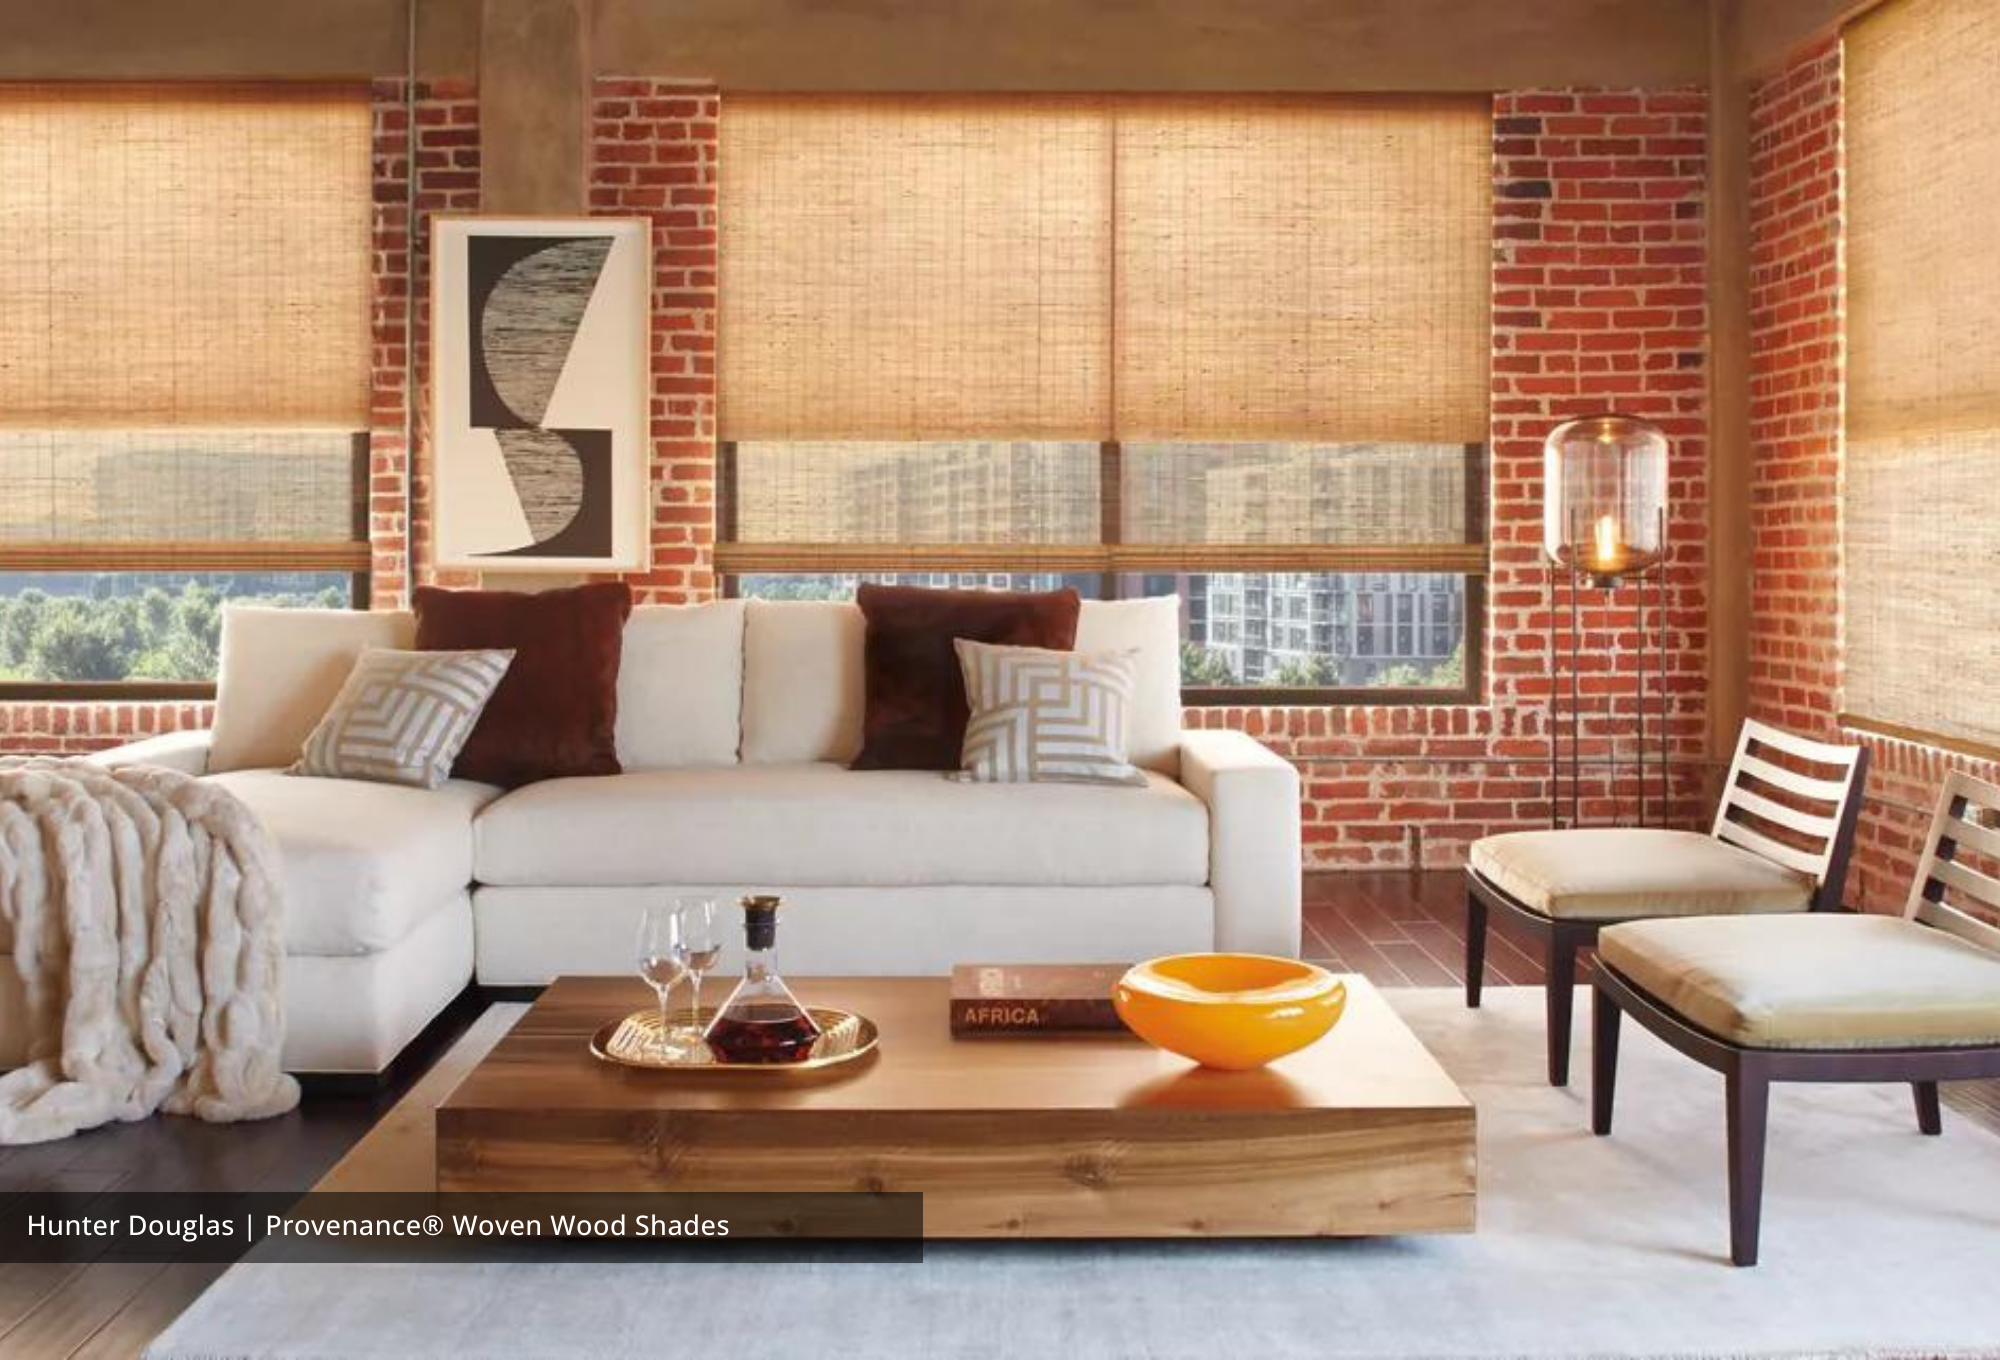 Hunter Douglas Woven Shades available at JC Licht.